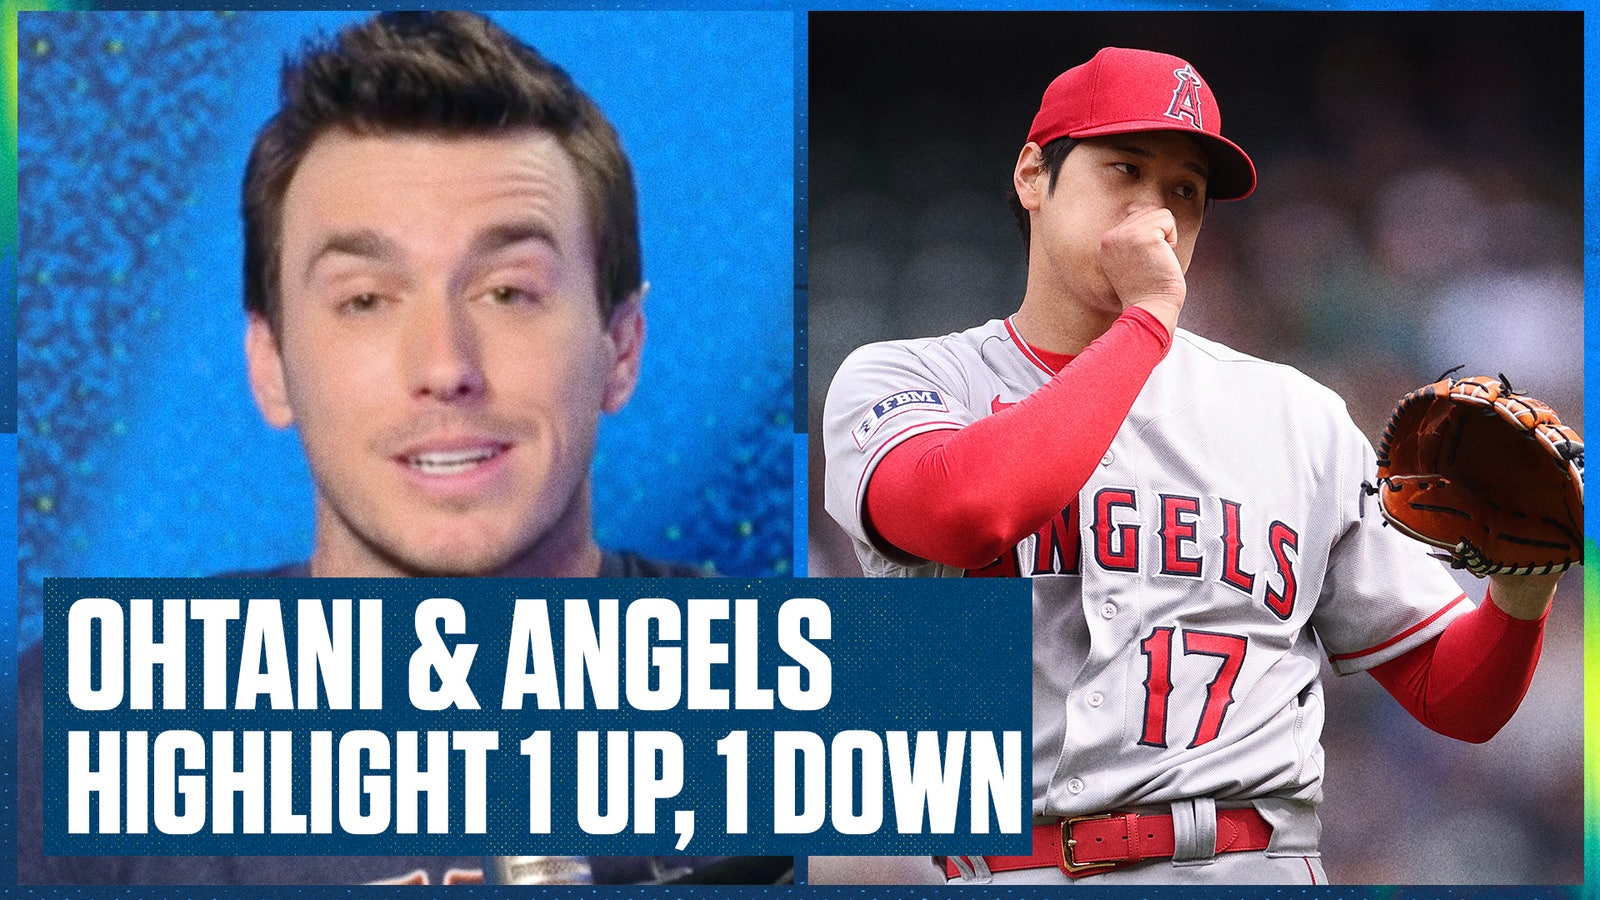 Shohei Ohtani & the Angels headline this week's 1 Up, 1 Down